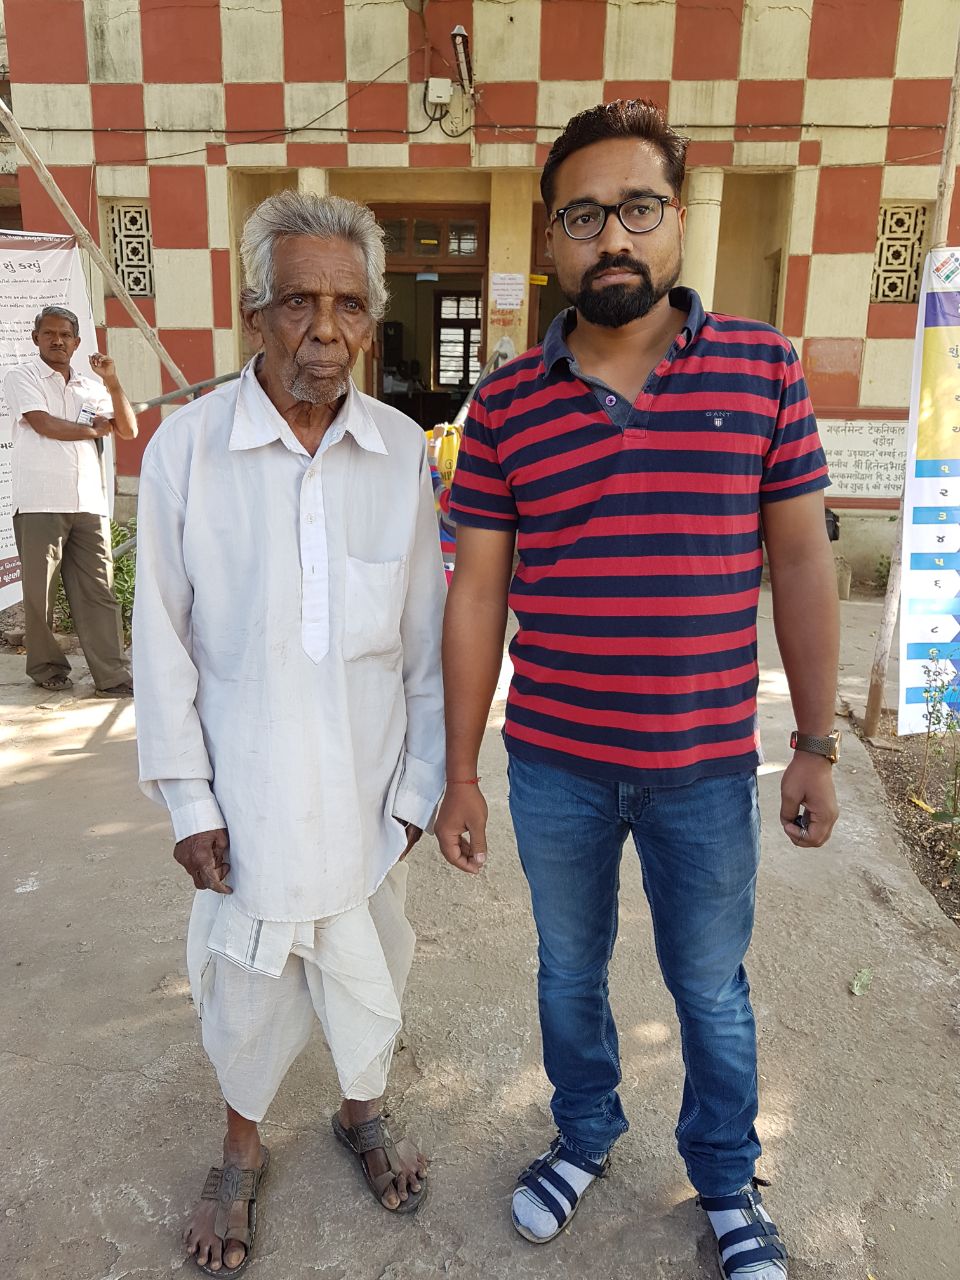 95 yr old and first time voters cast their votes